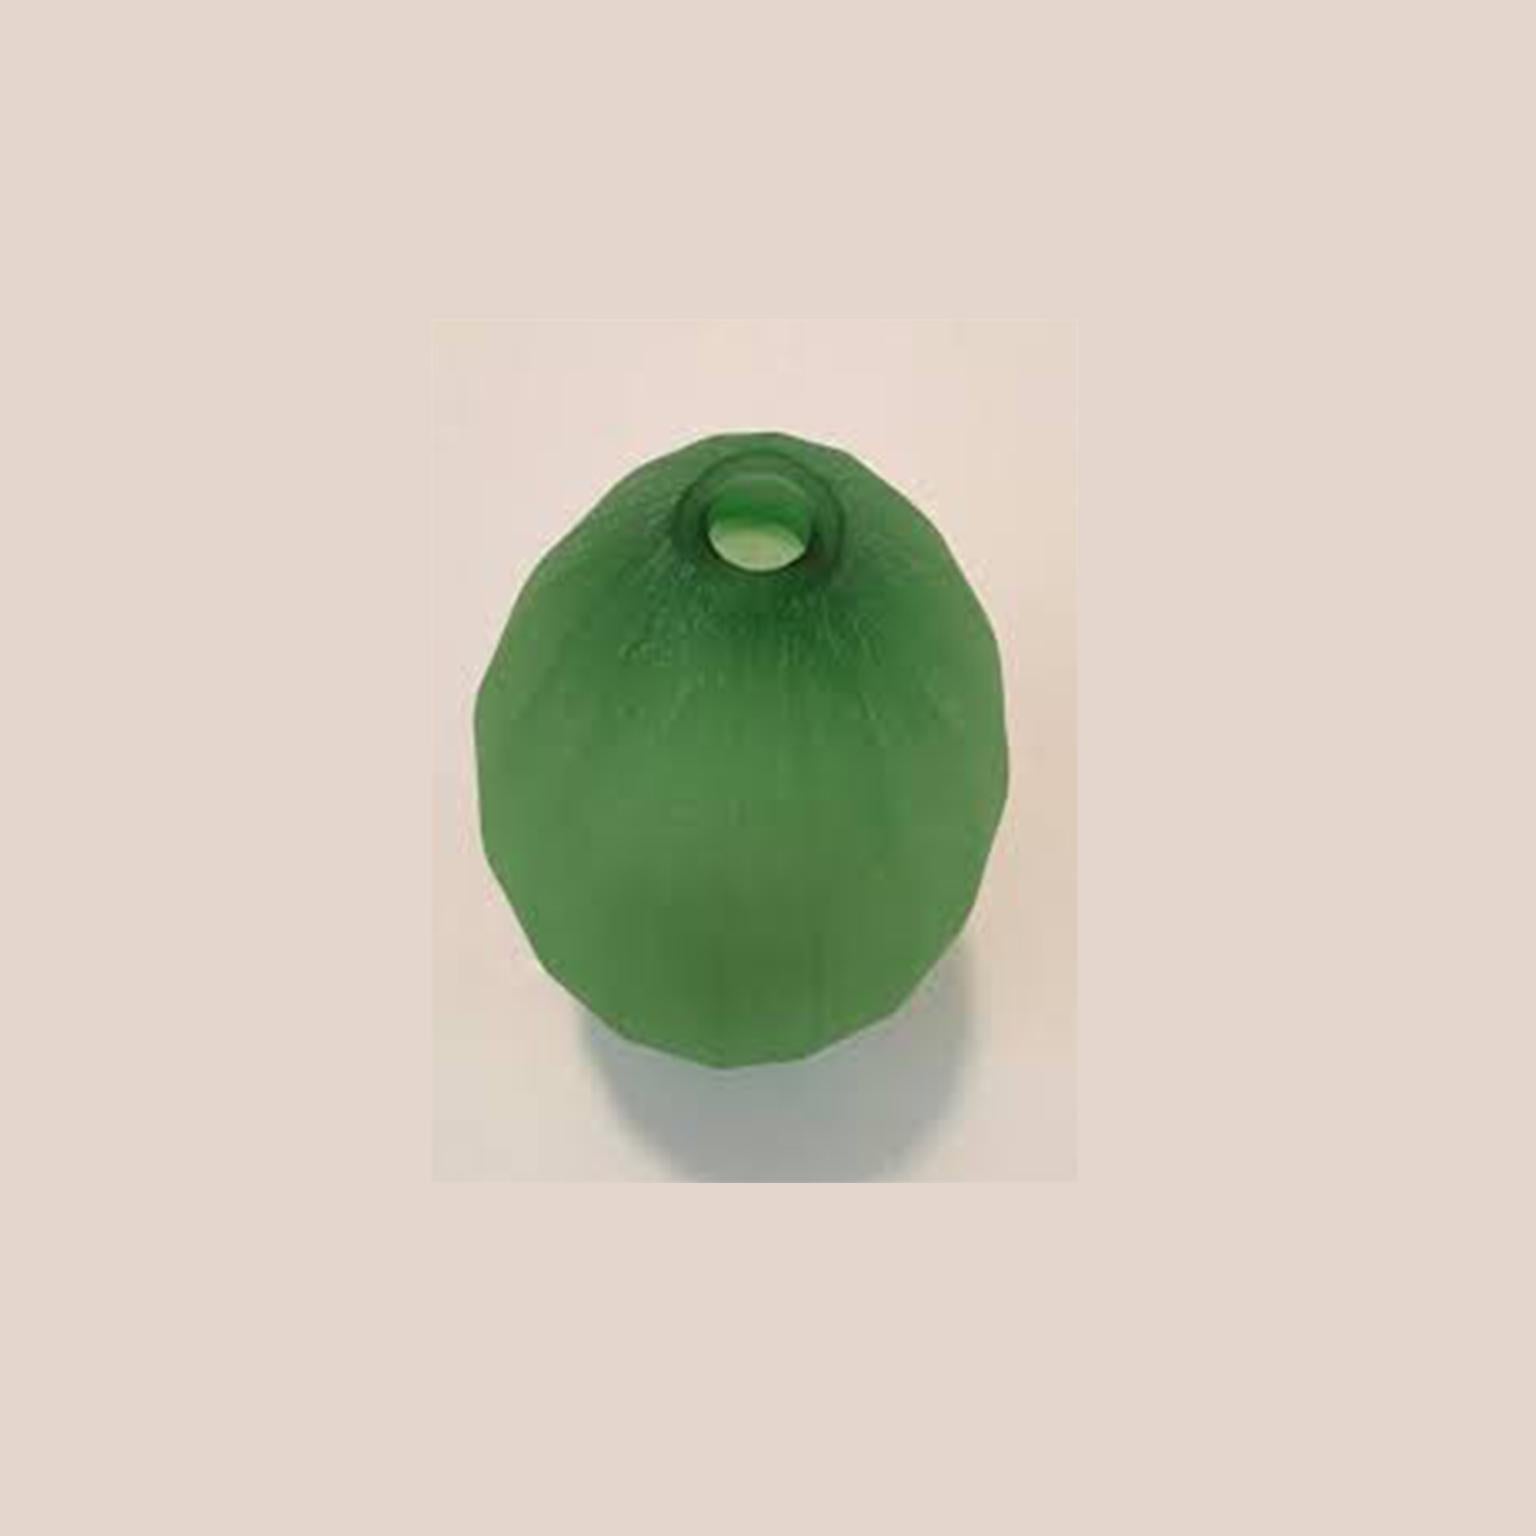 Vase designed by Laura de Santillana in edition for Arcade, 2001. This is from a series of tropical fruit and plant form inspired vases with the same matte, hand engraved, finish:
Papaia, made in three different shades of green. Mango, made in dark